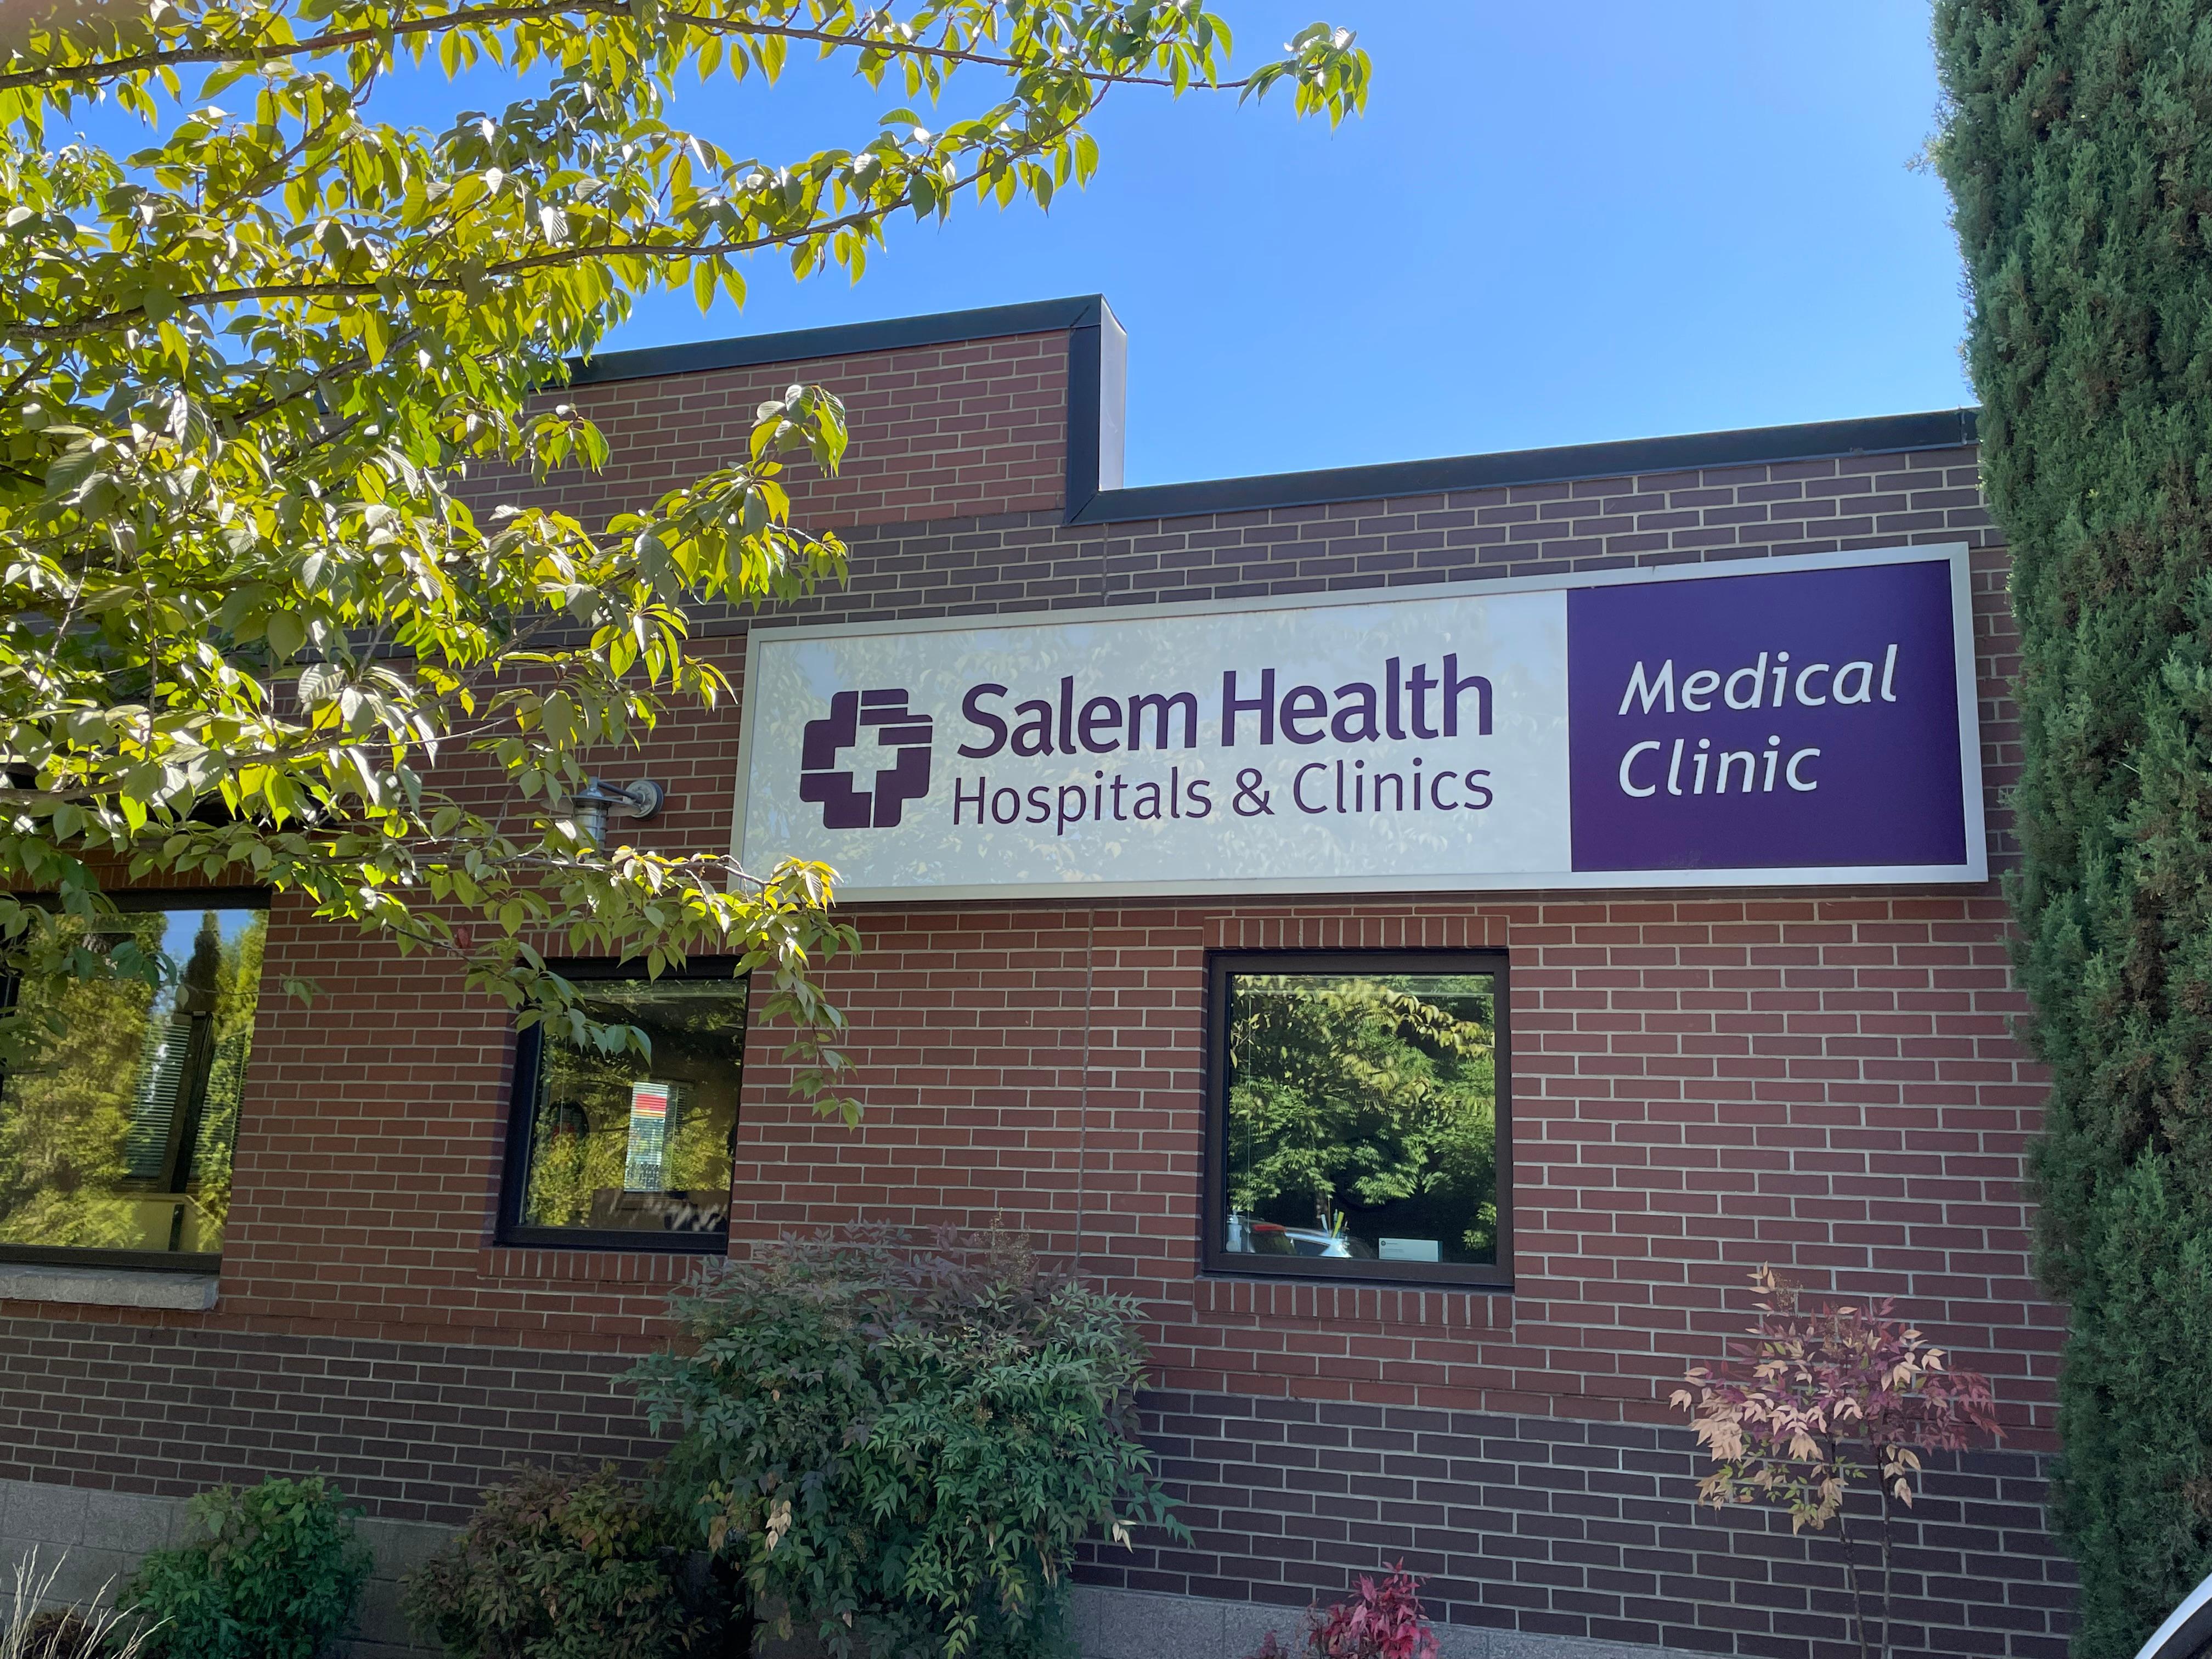 Main building sign of the clinic, visible from the parking lot.